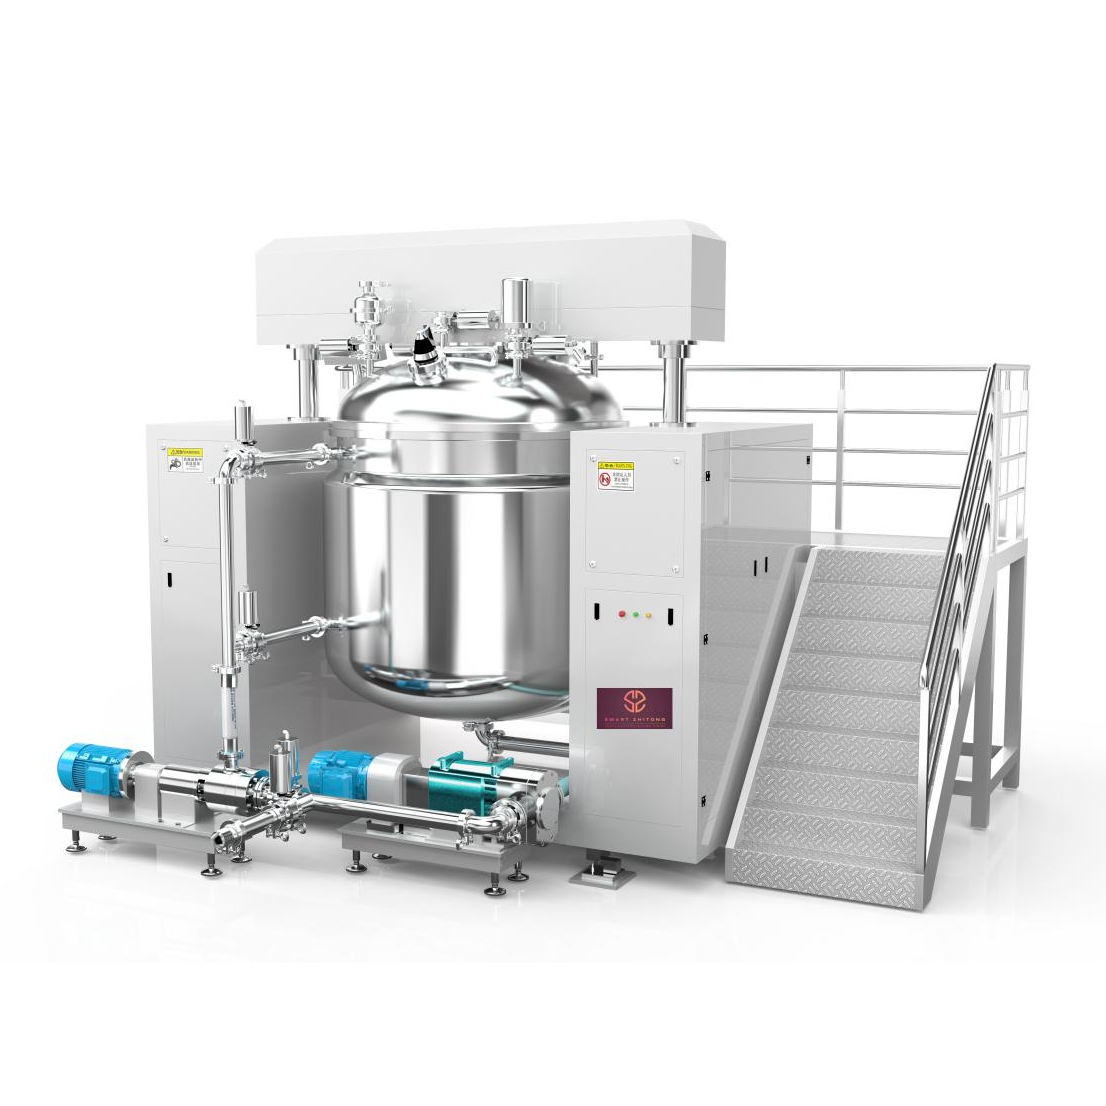 Wholesale Price Cosmetic Manufacturing Equipment - Ointment Mixing Machine for pharmaceuticals industry with CE UL TUV – Smart ZhiTong